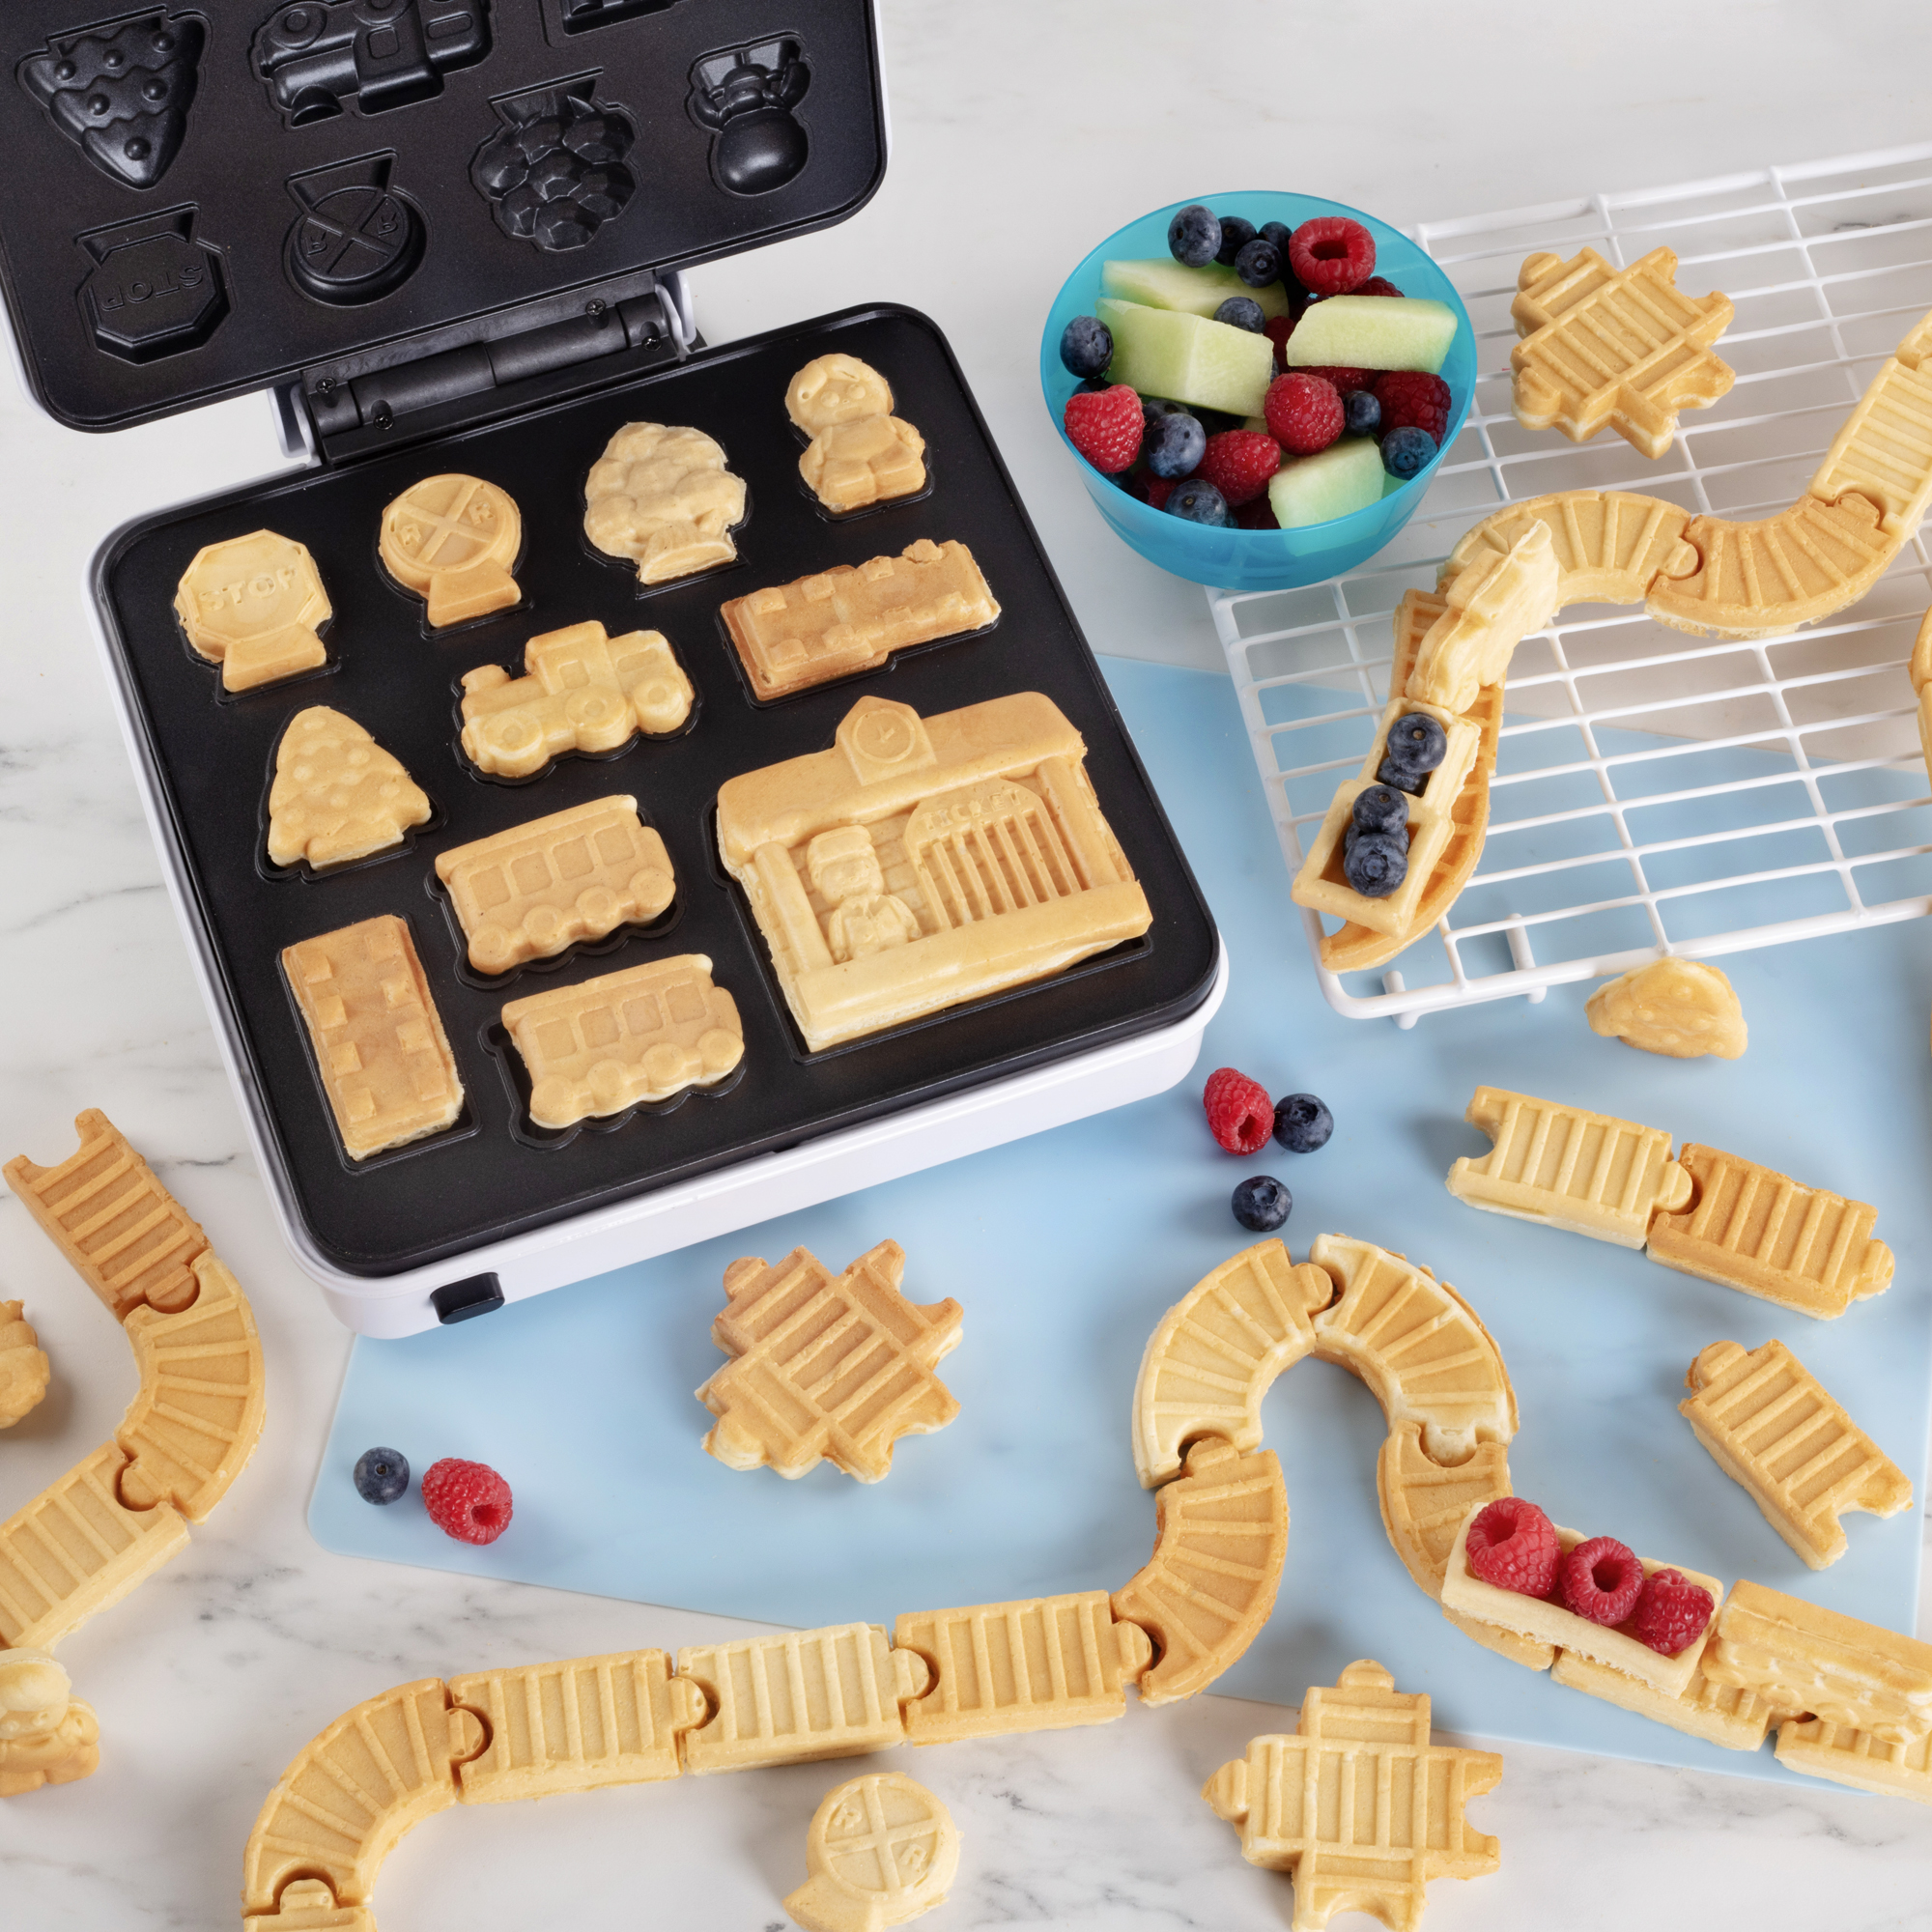 Building Brick Electric Waffle Maker- Cook Fun, Buildable Waffles